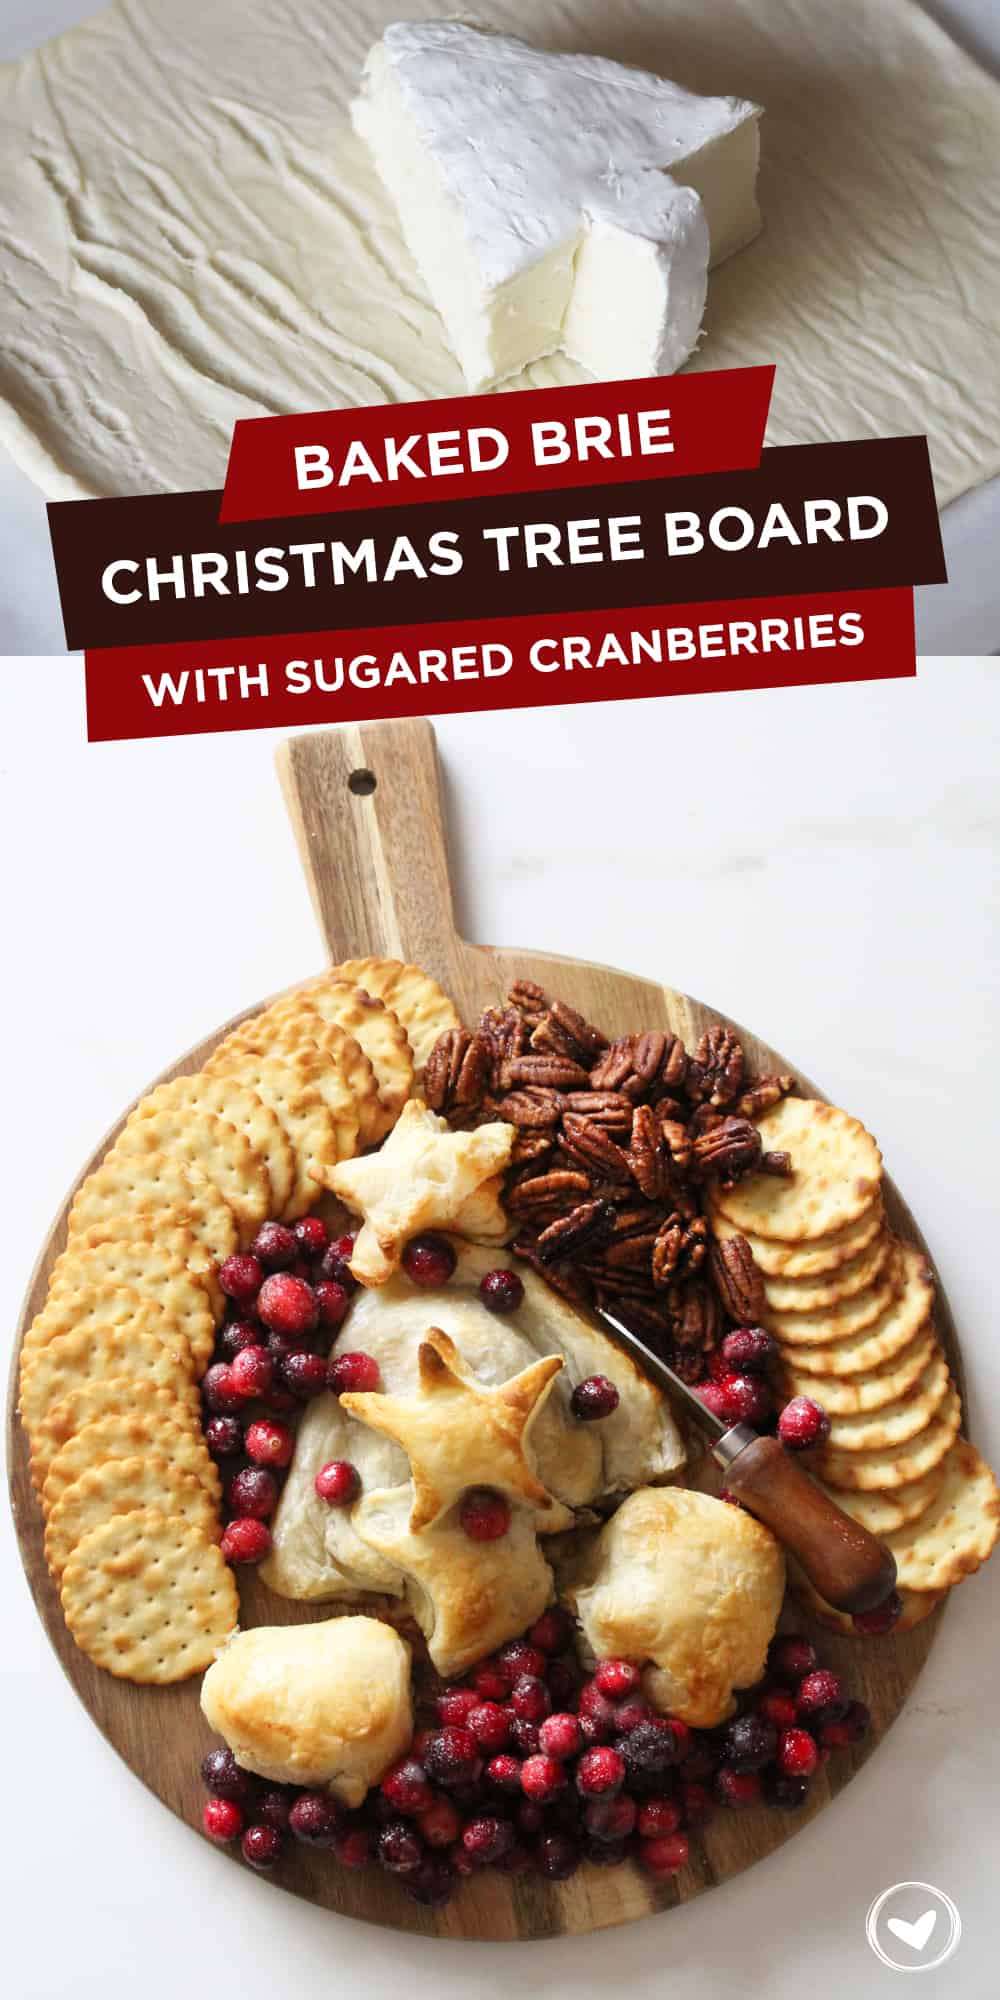 Baked Brie Christmas Tree Board with Sugared Cranberries